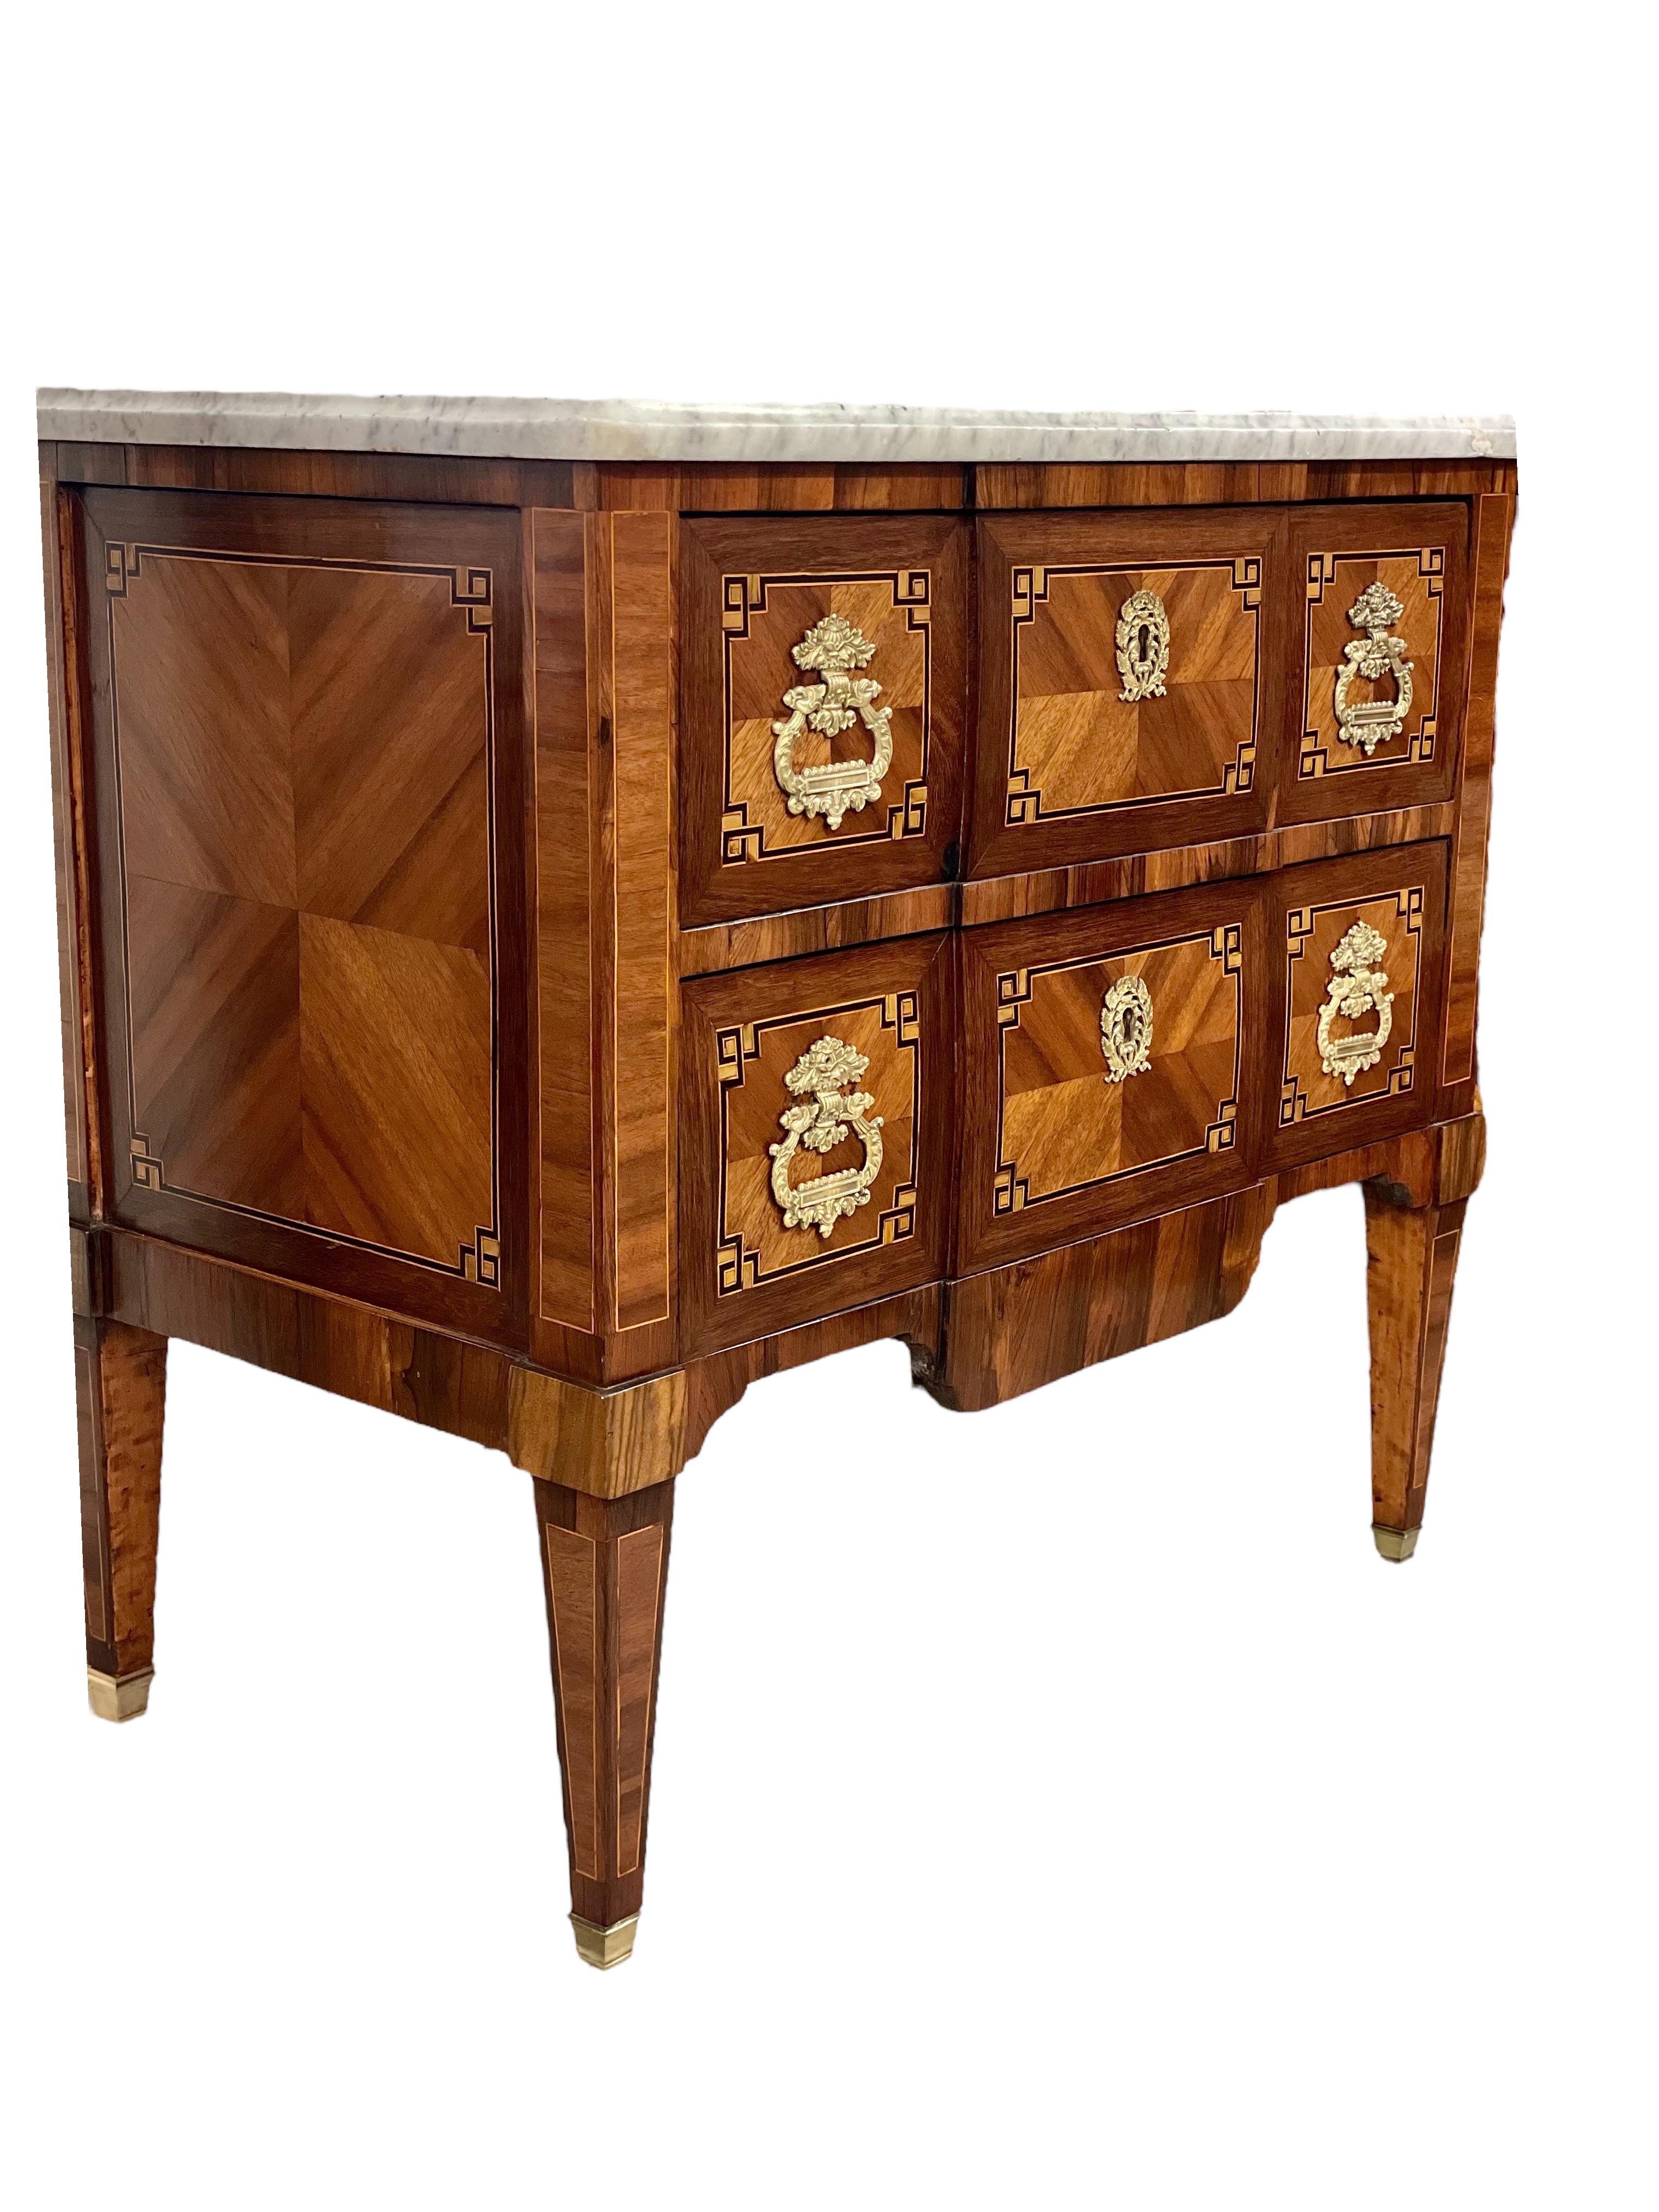 An exceptionally beautiful marquetry inlaid commode 'à Ressaut' opening with two wide drawers, and crafted in the Louis XVI style. 
This very decorative late 18th century chest of drawers features a central projection at the front, and rests on four